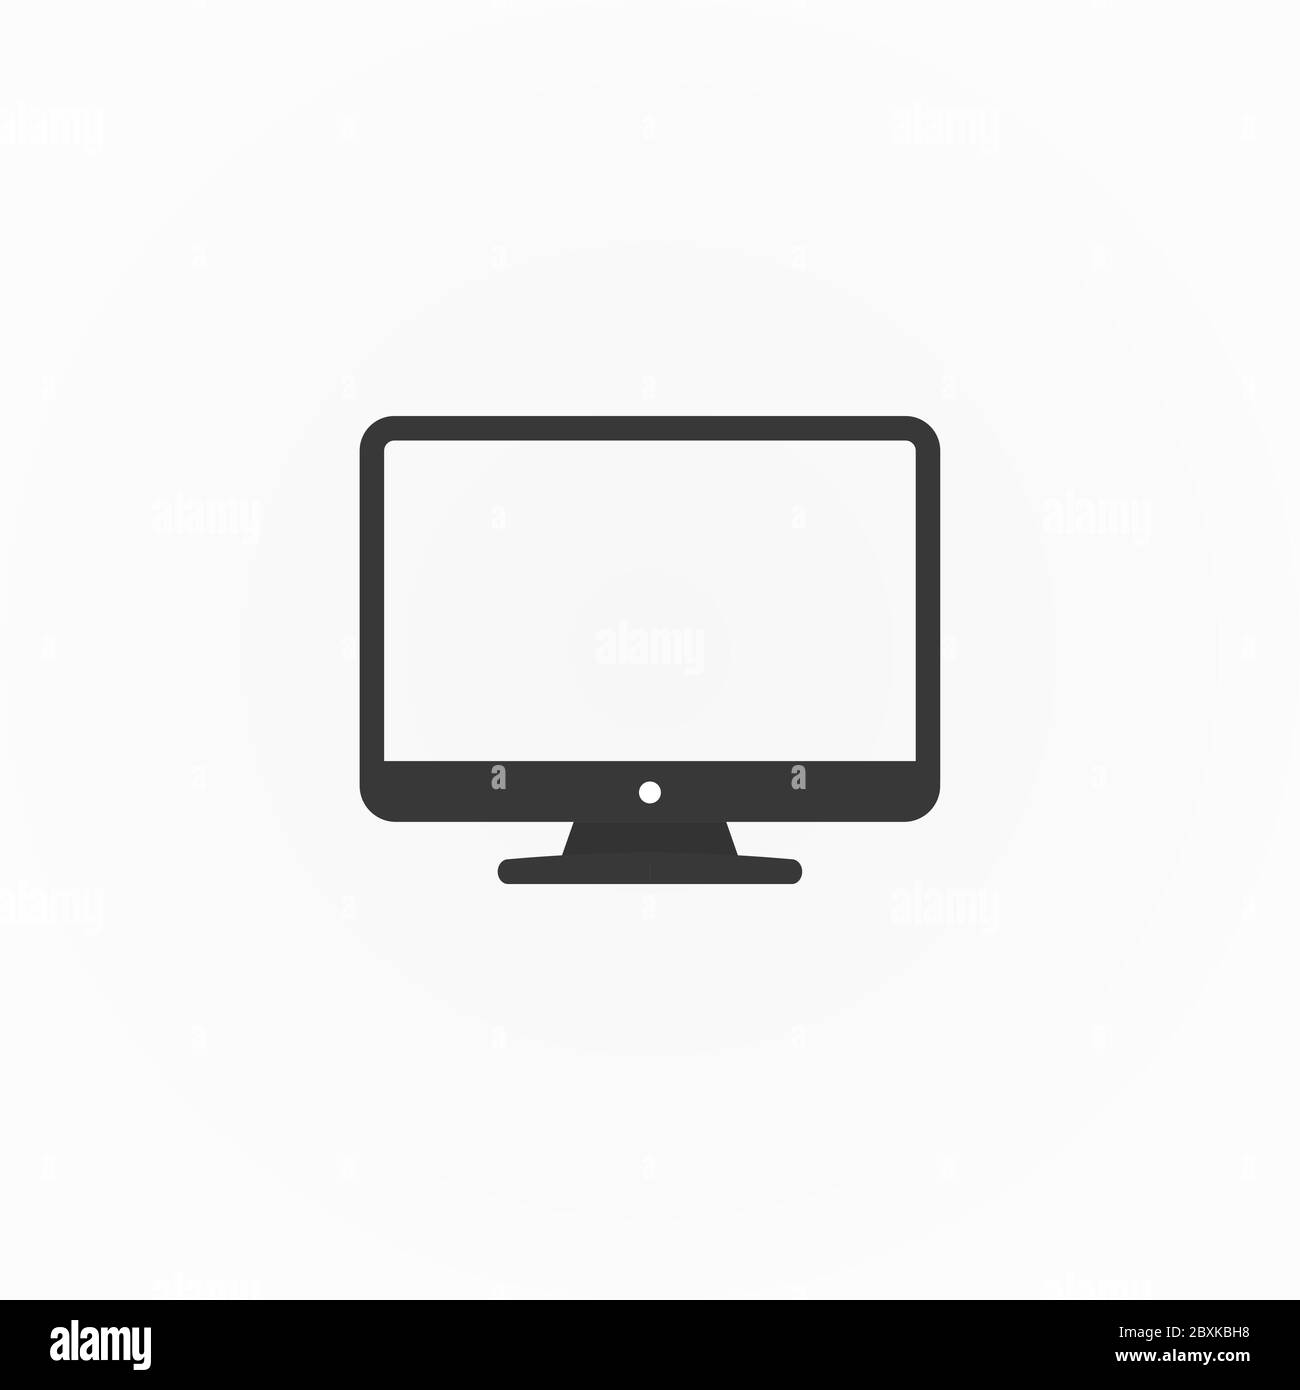 Computer icon. isolated vector illustration on white background Stock Vector